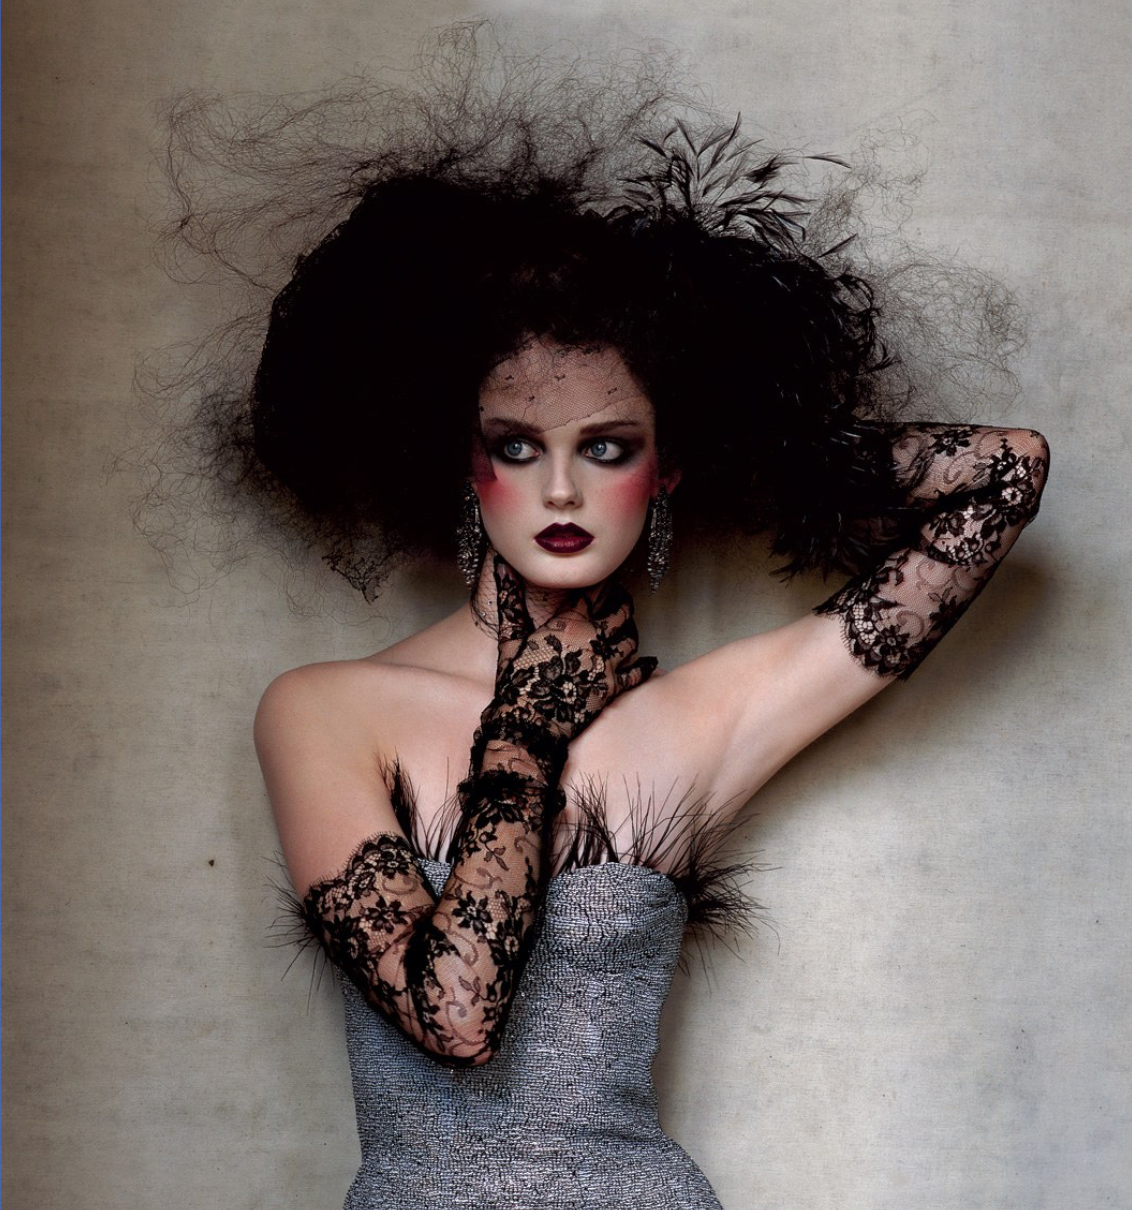 Why has Goth fashion survived for so long?